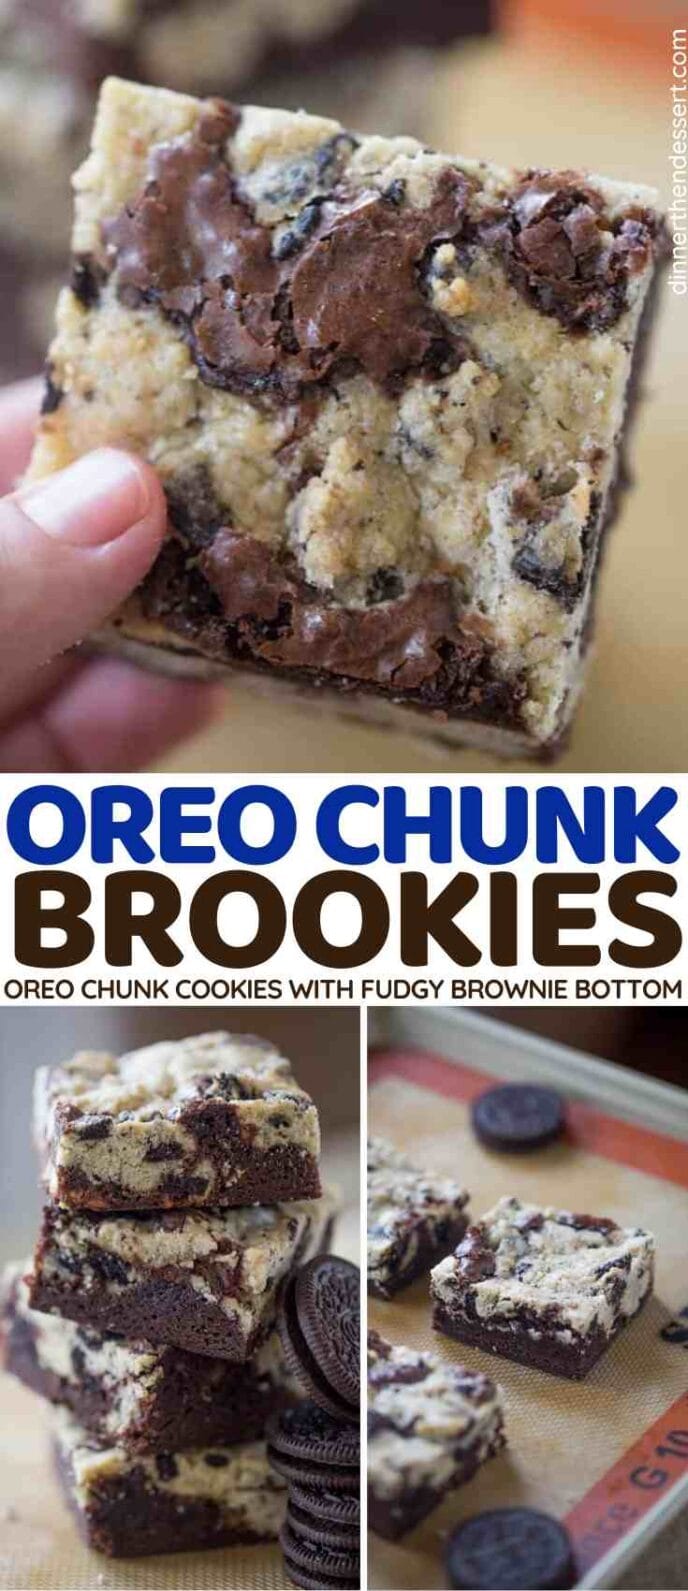 Collage of photos of Oreo Cookie Brookies with fudge brownie bottom